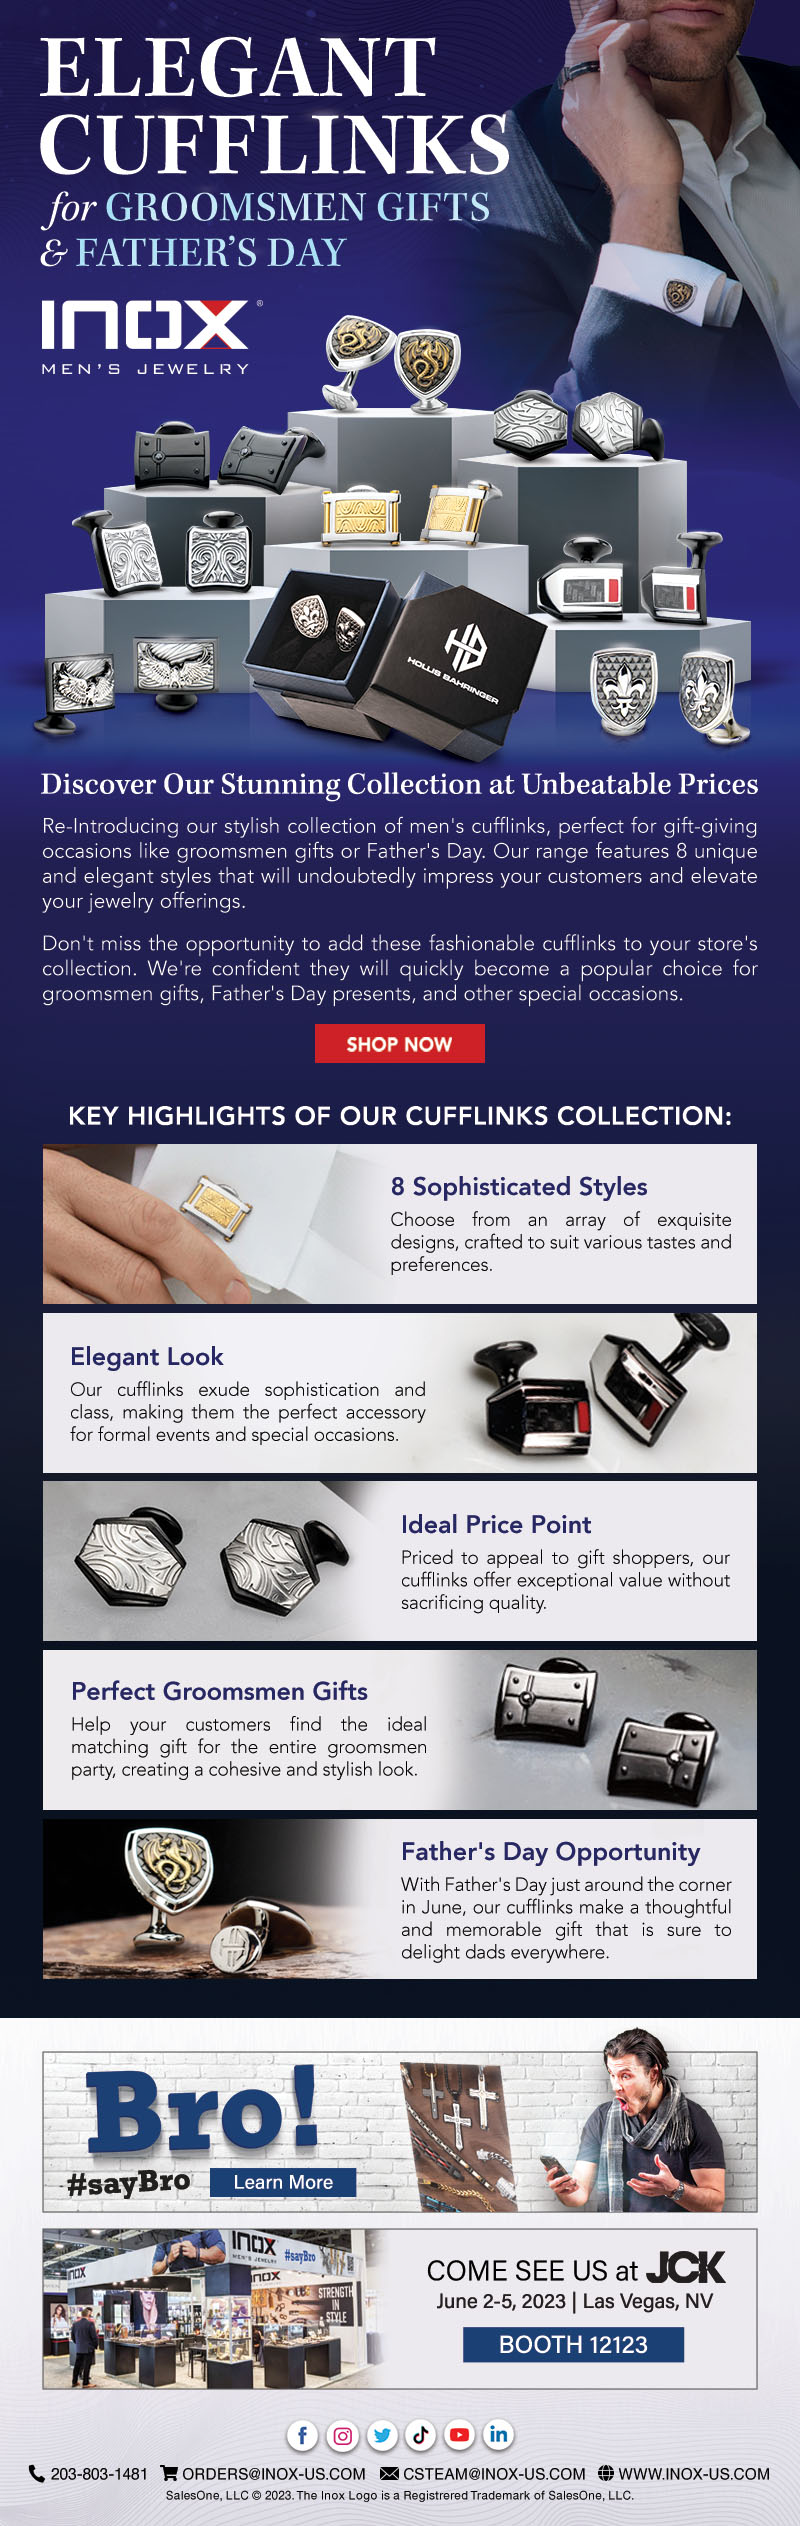 Discover our Elegant Cufflinks at Unbeatable Prices